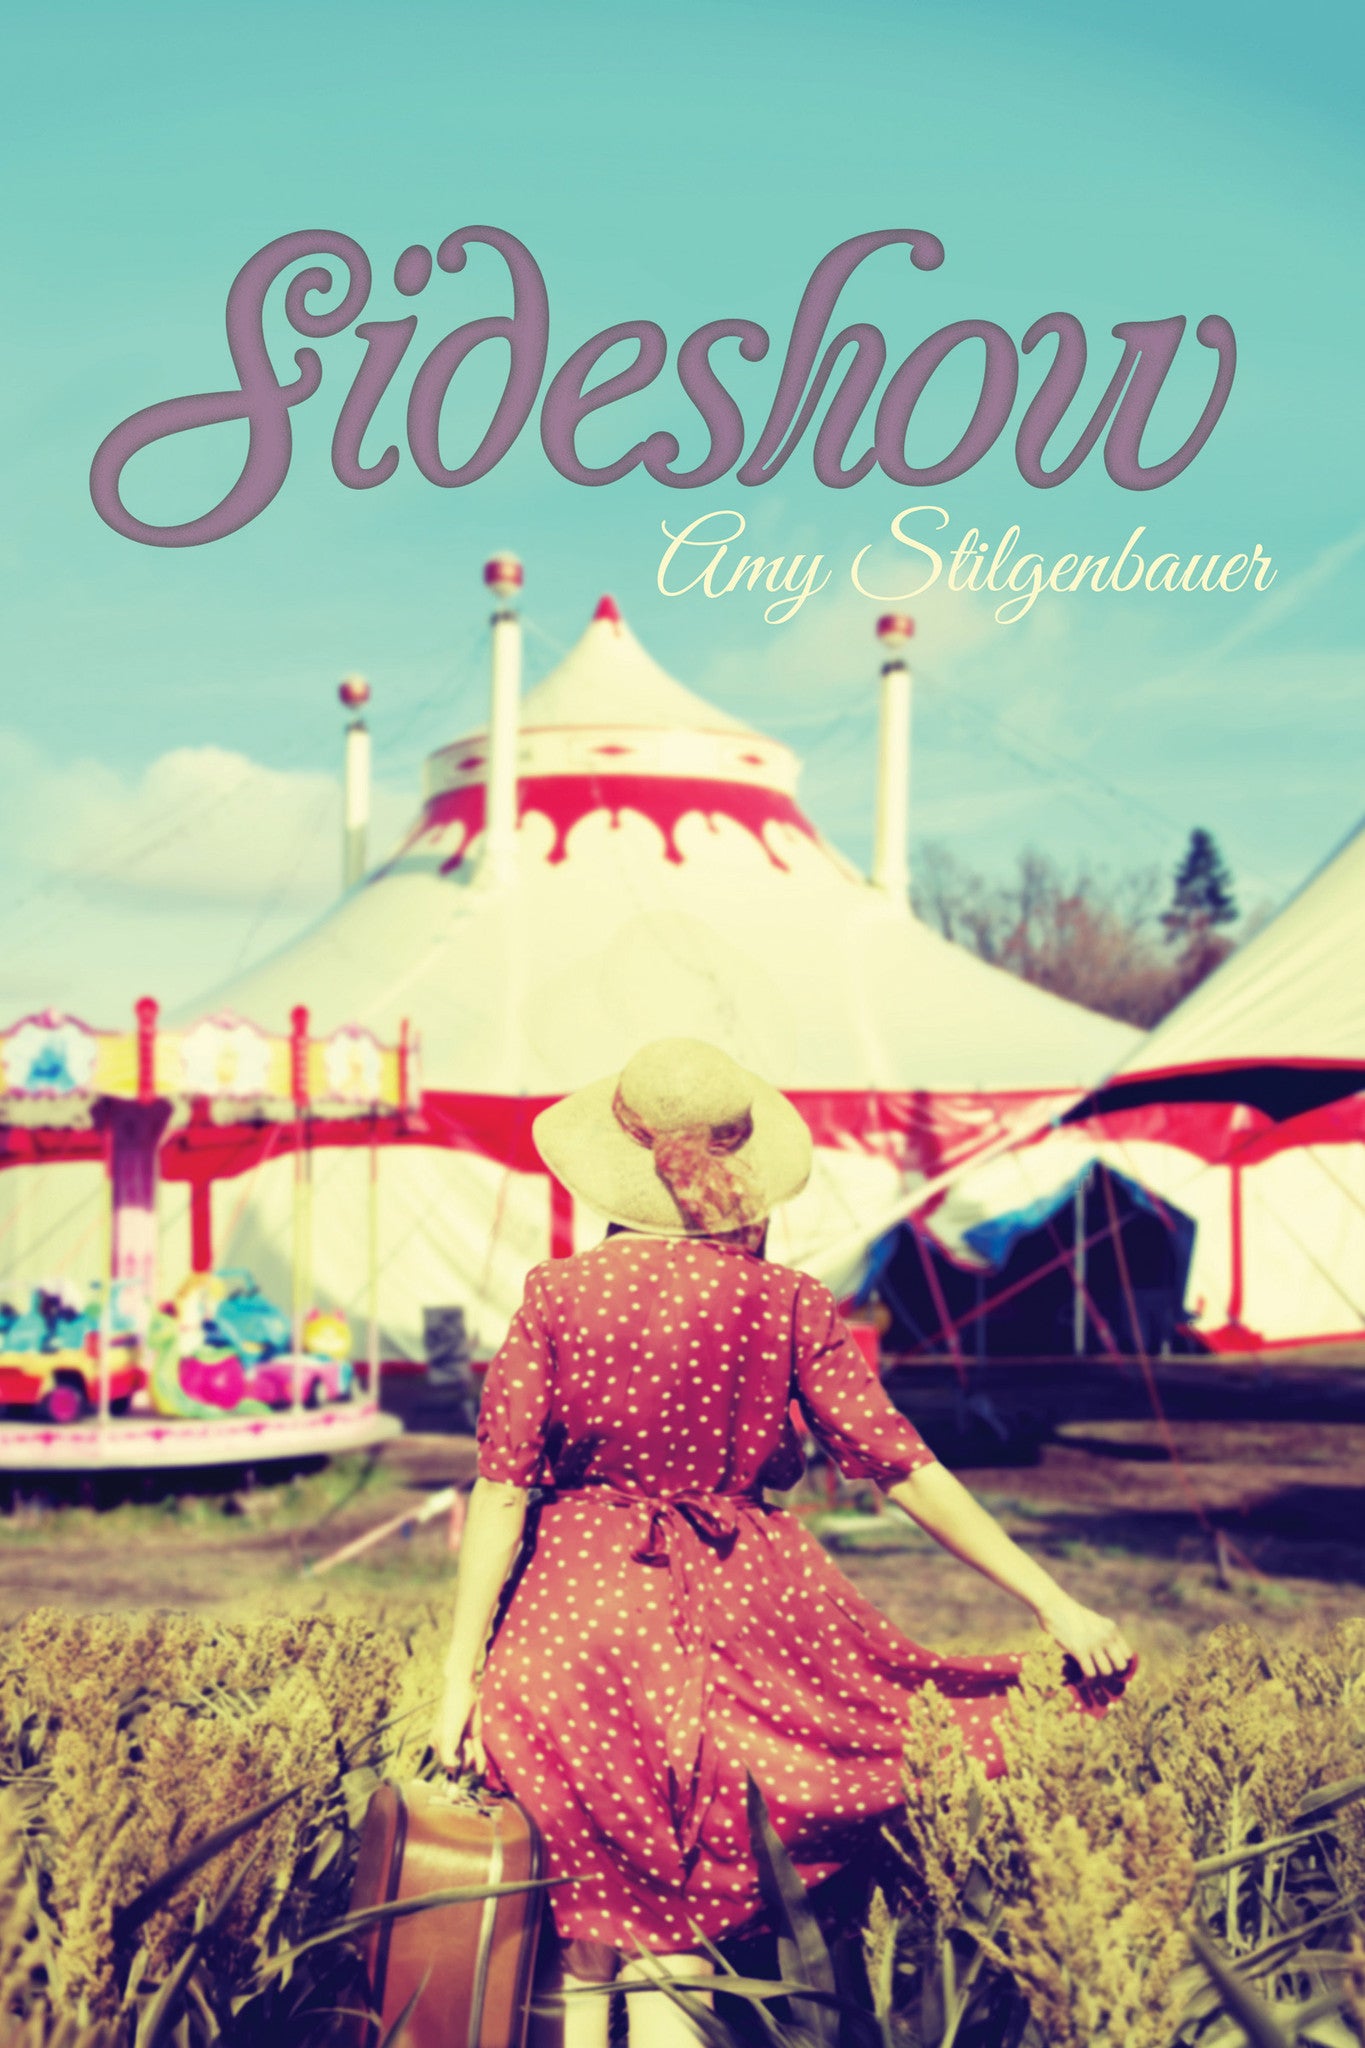 Sideshow (eBook package)